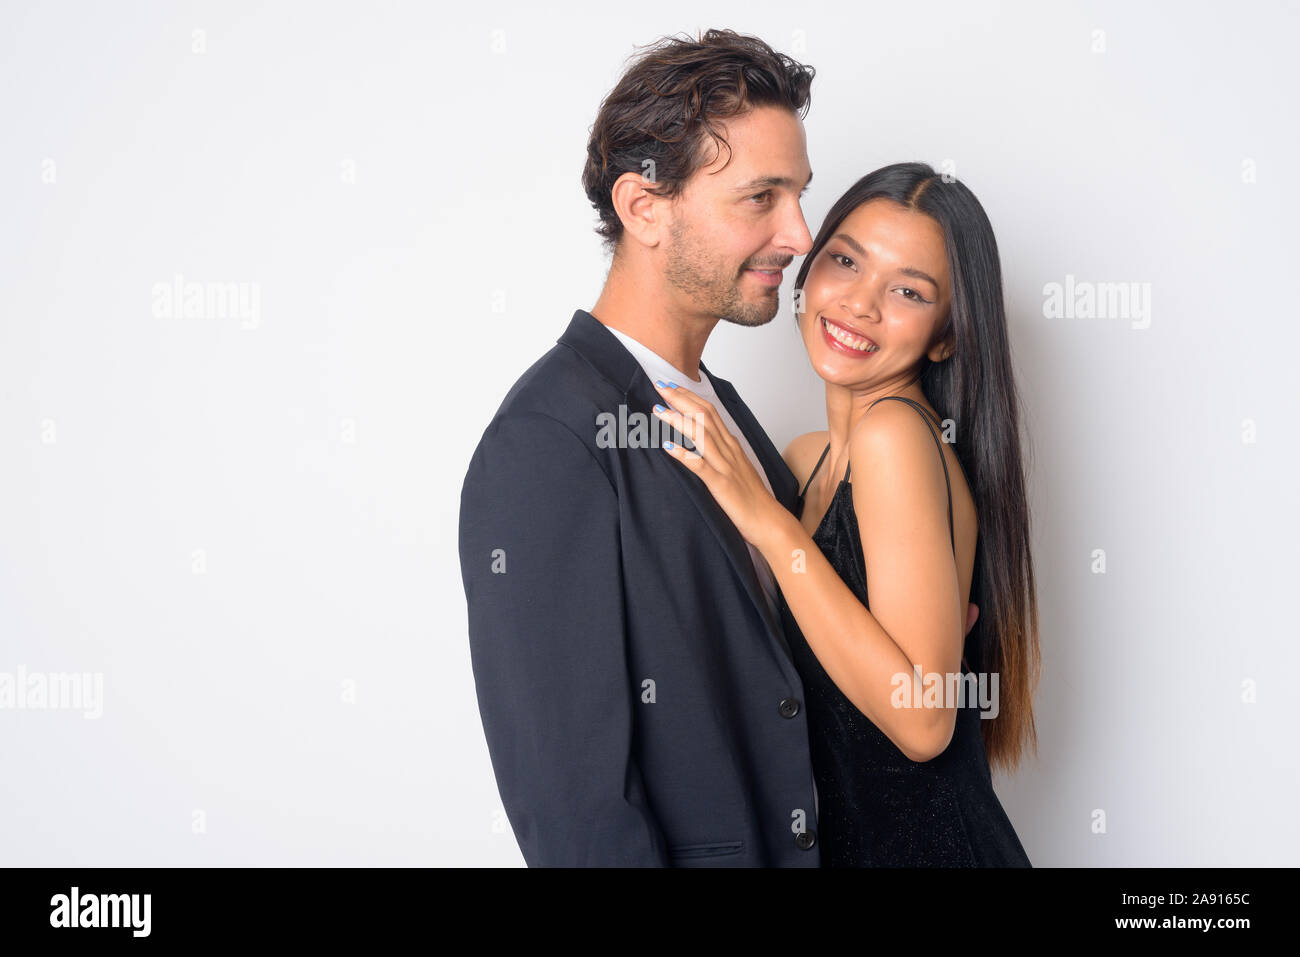 Portrait of happy multi ethnic business couple embracing together Stock Photo